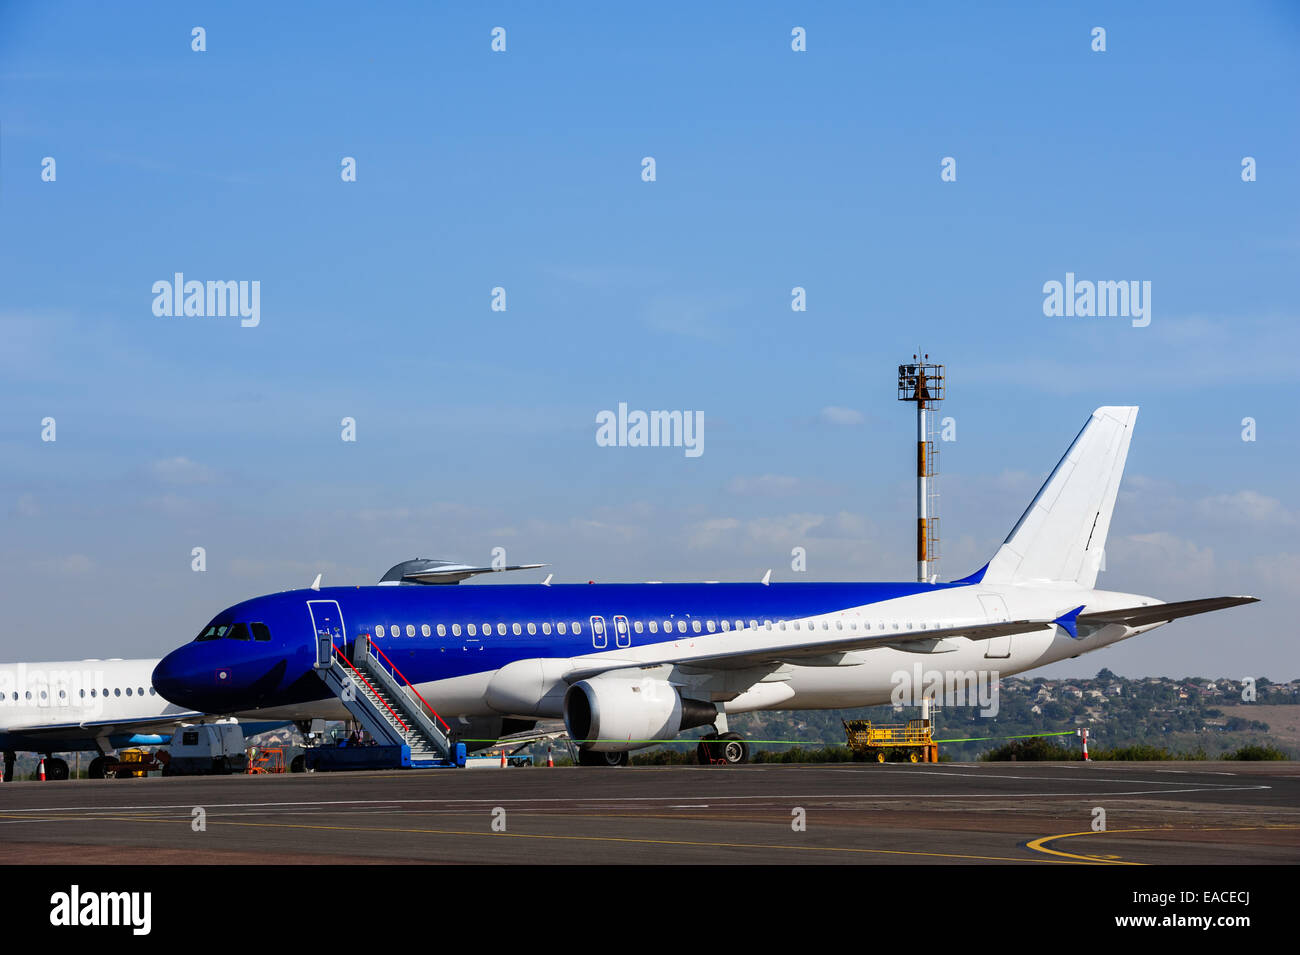 Commercial airplane at airport Stock Photo